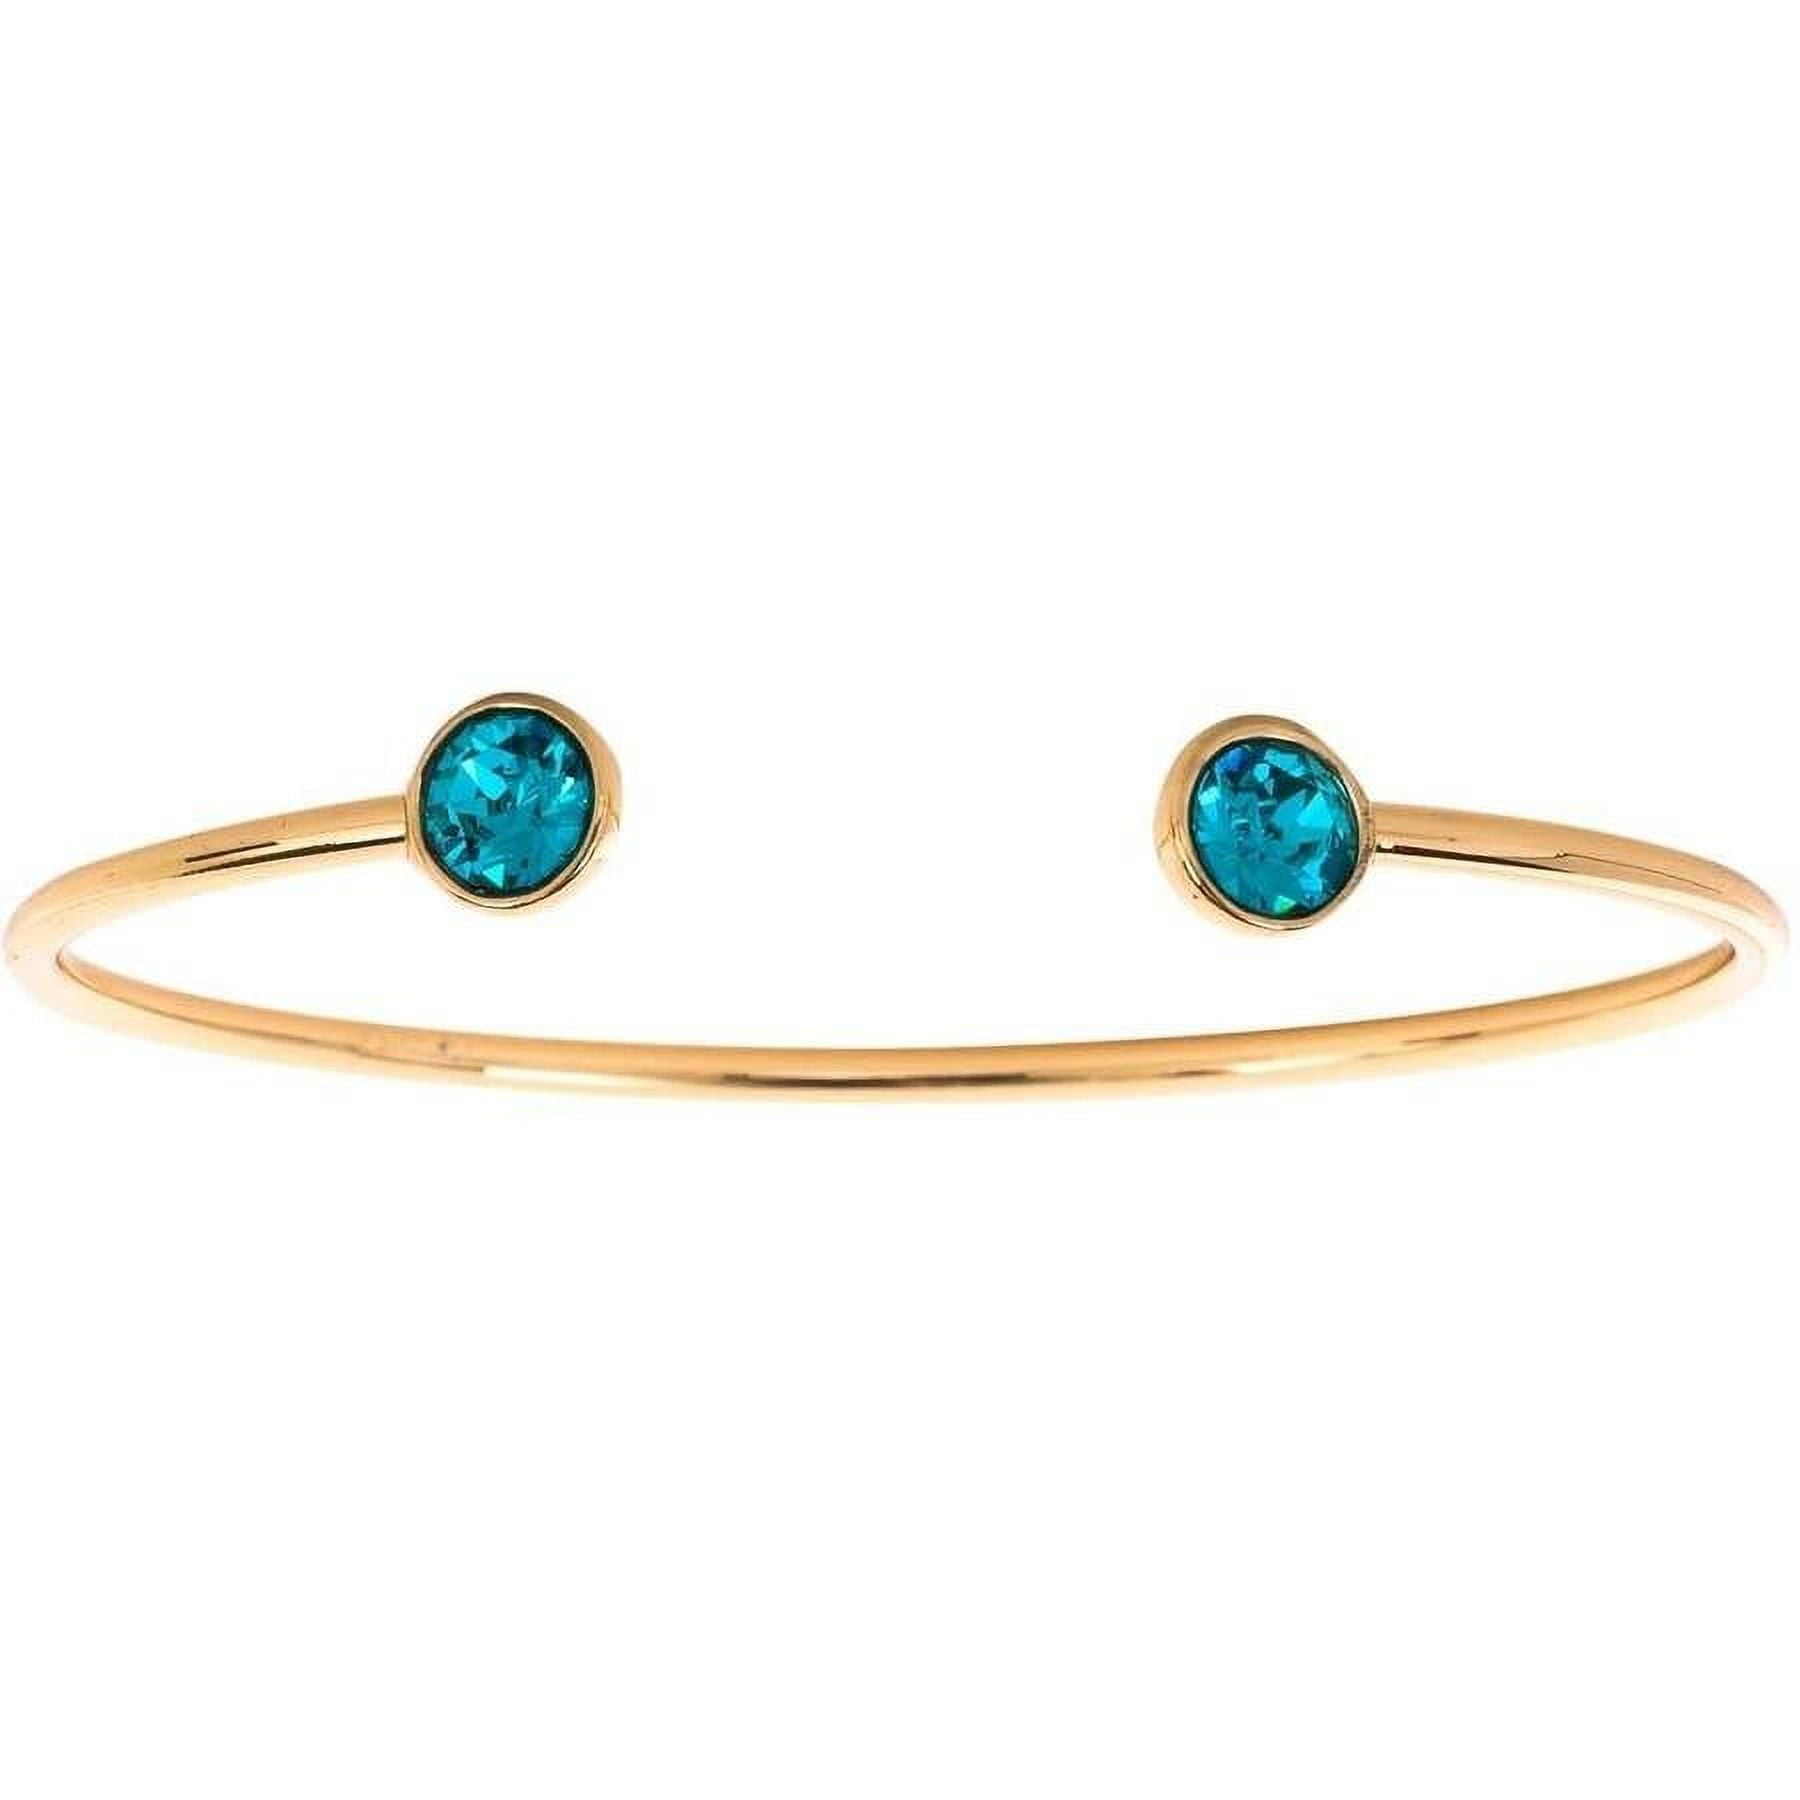 Swarovski Crystal 14kt Gold-Plated Bangle, Available in 12 Birthstones ...